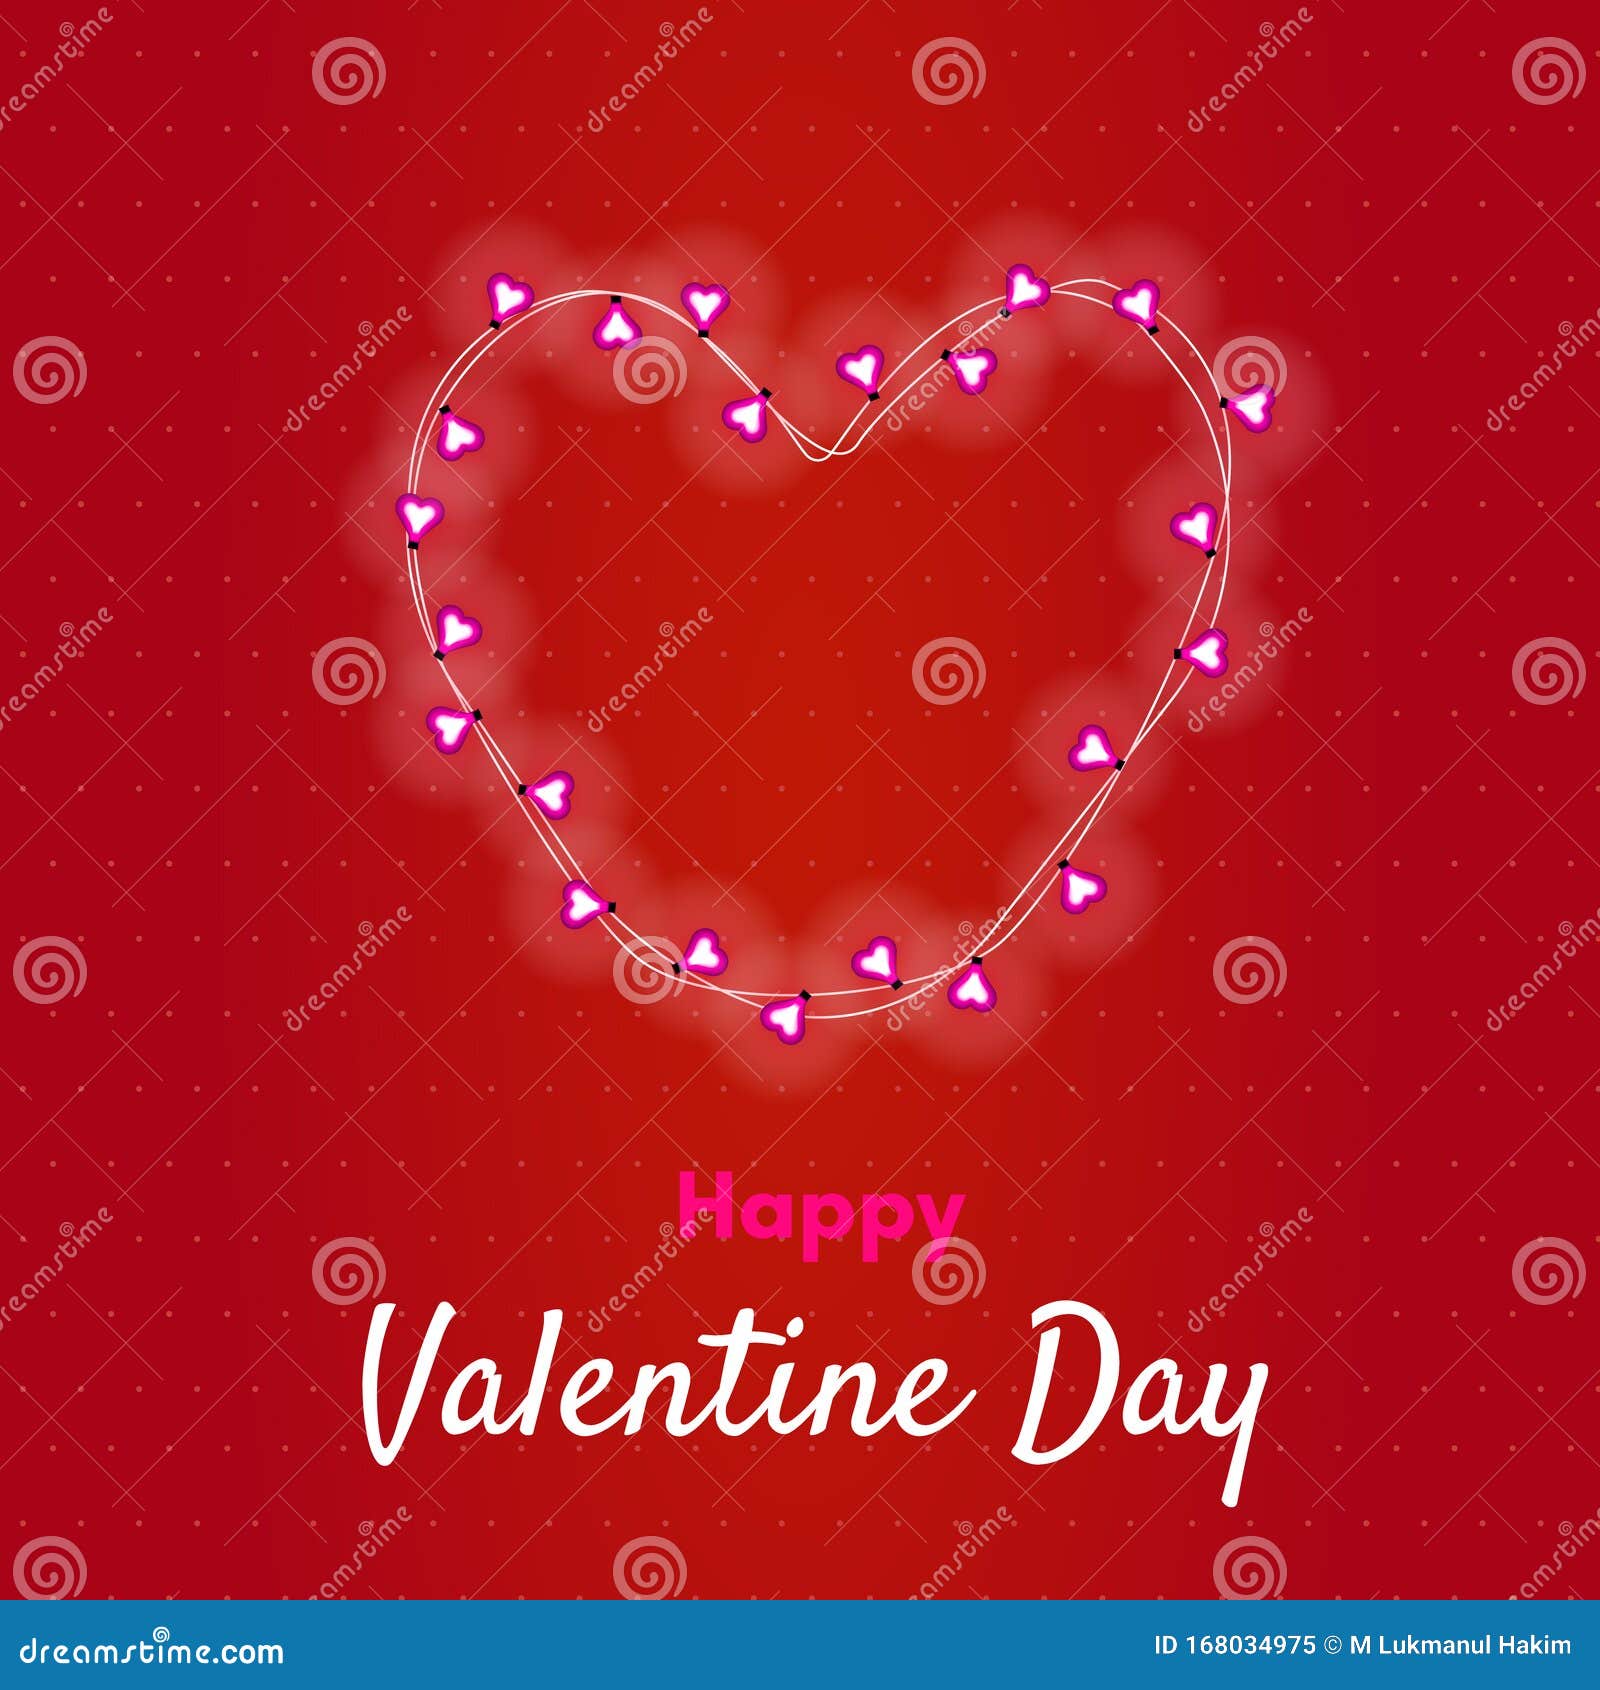 Aesthetic Square Background Happy Valentine Day with Lamp Love in Maroon  Color Modern Stock Vector - Illustration of light, glowing: 168034975